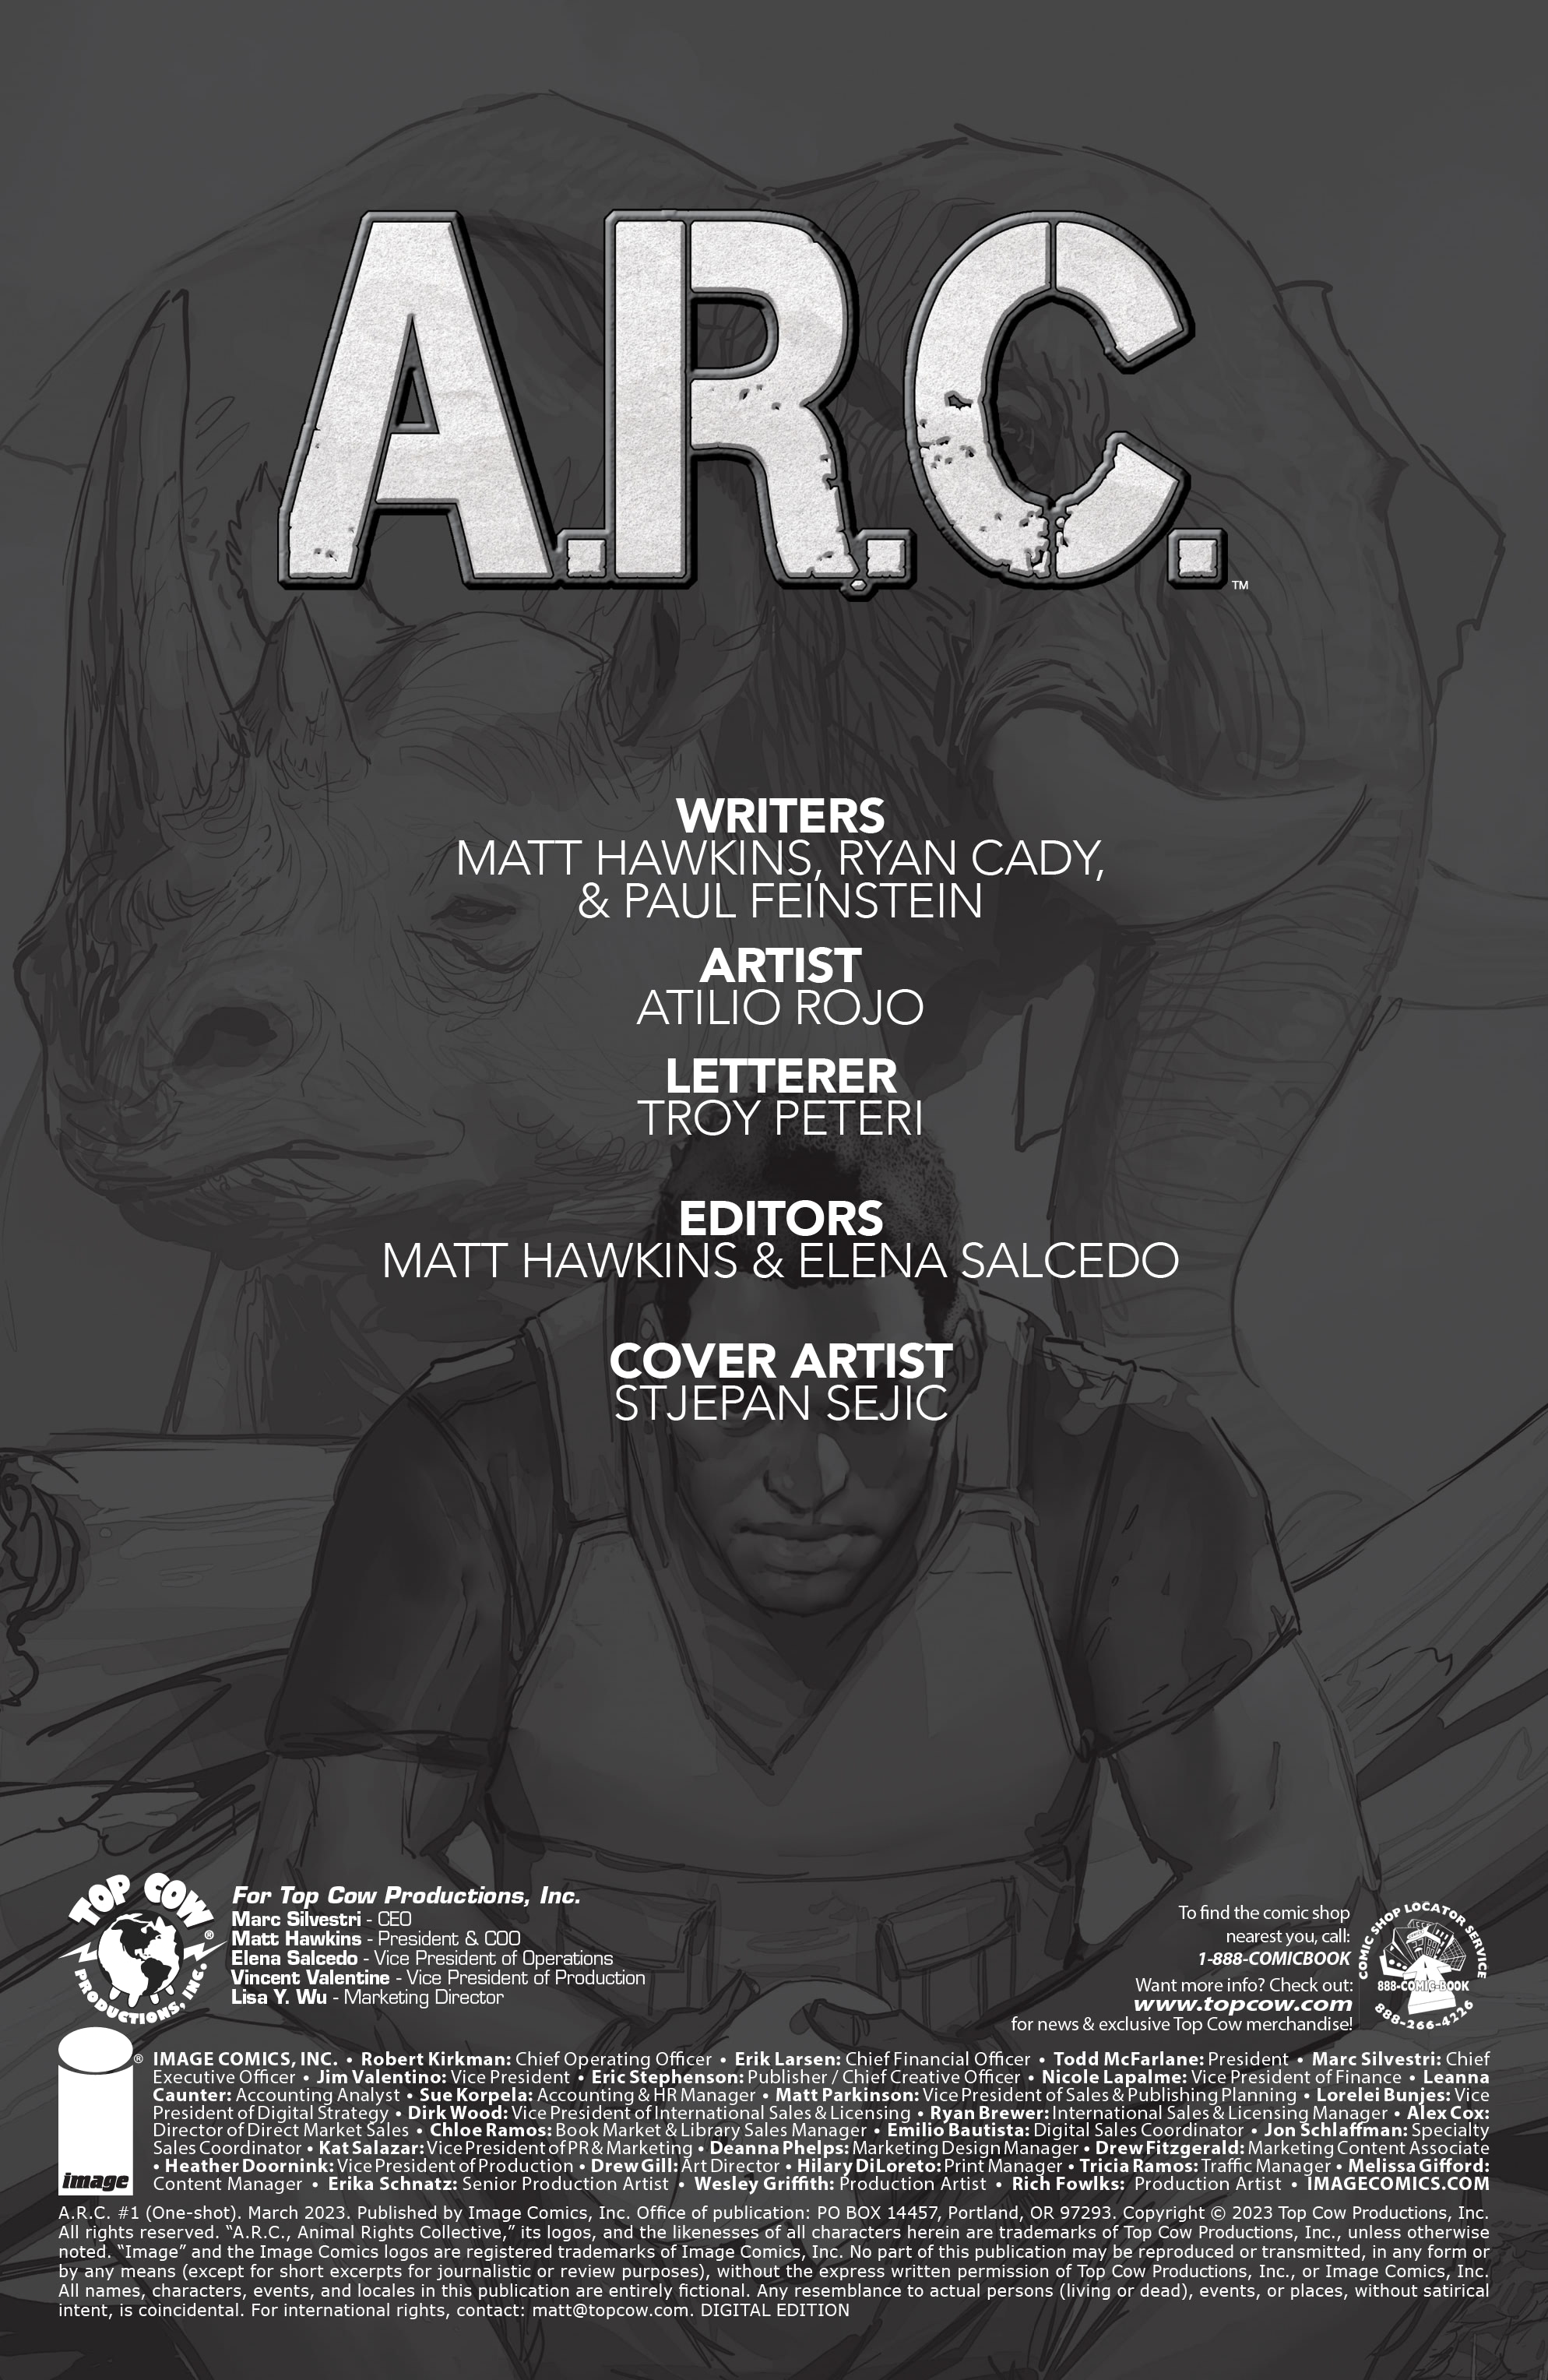 Read online A.R.C. comic -  Issue # Full - 2